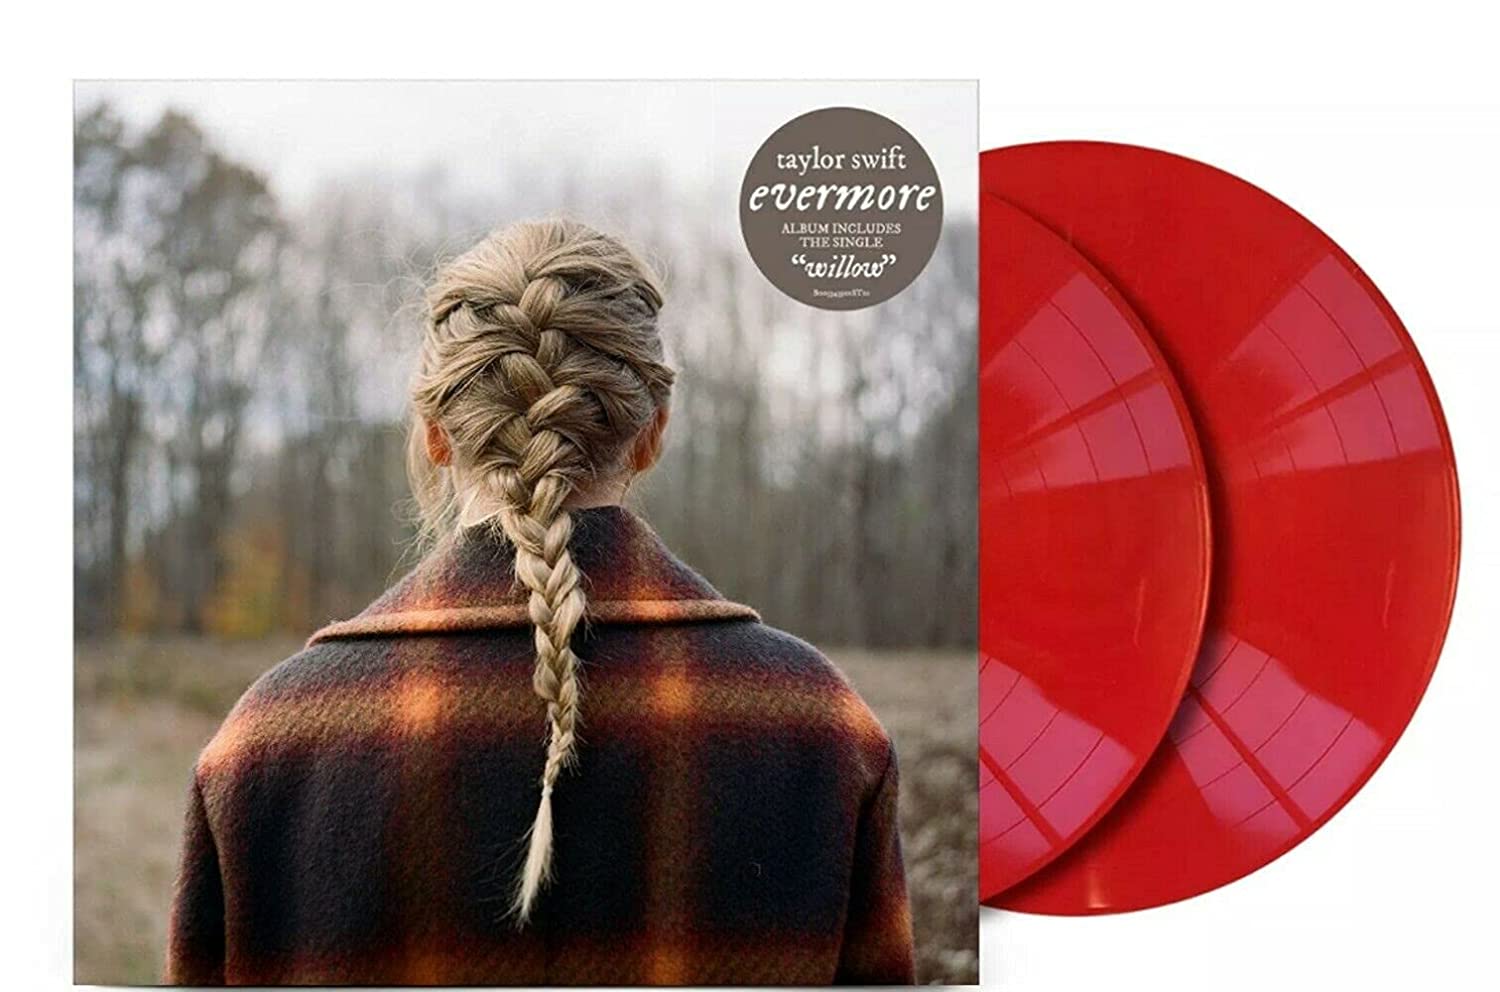 Evermore [Explicit Content] by Taylor Swift - Exclusive Red Vinyl - LV'S Global Media